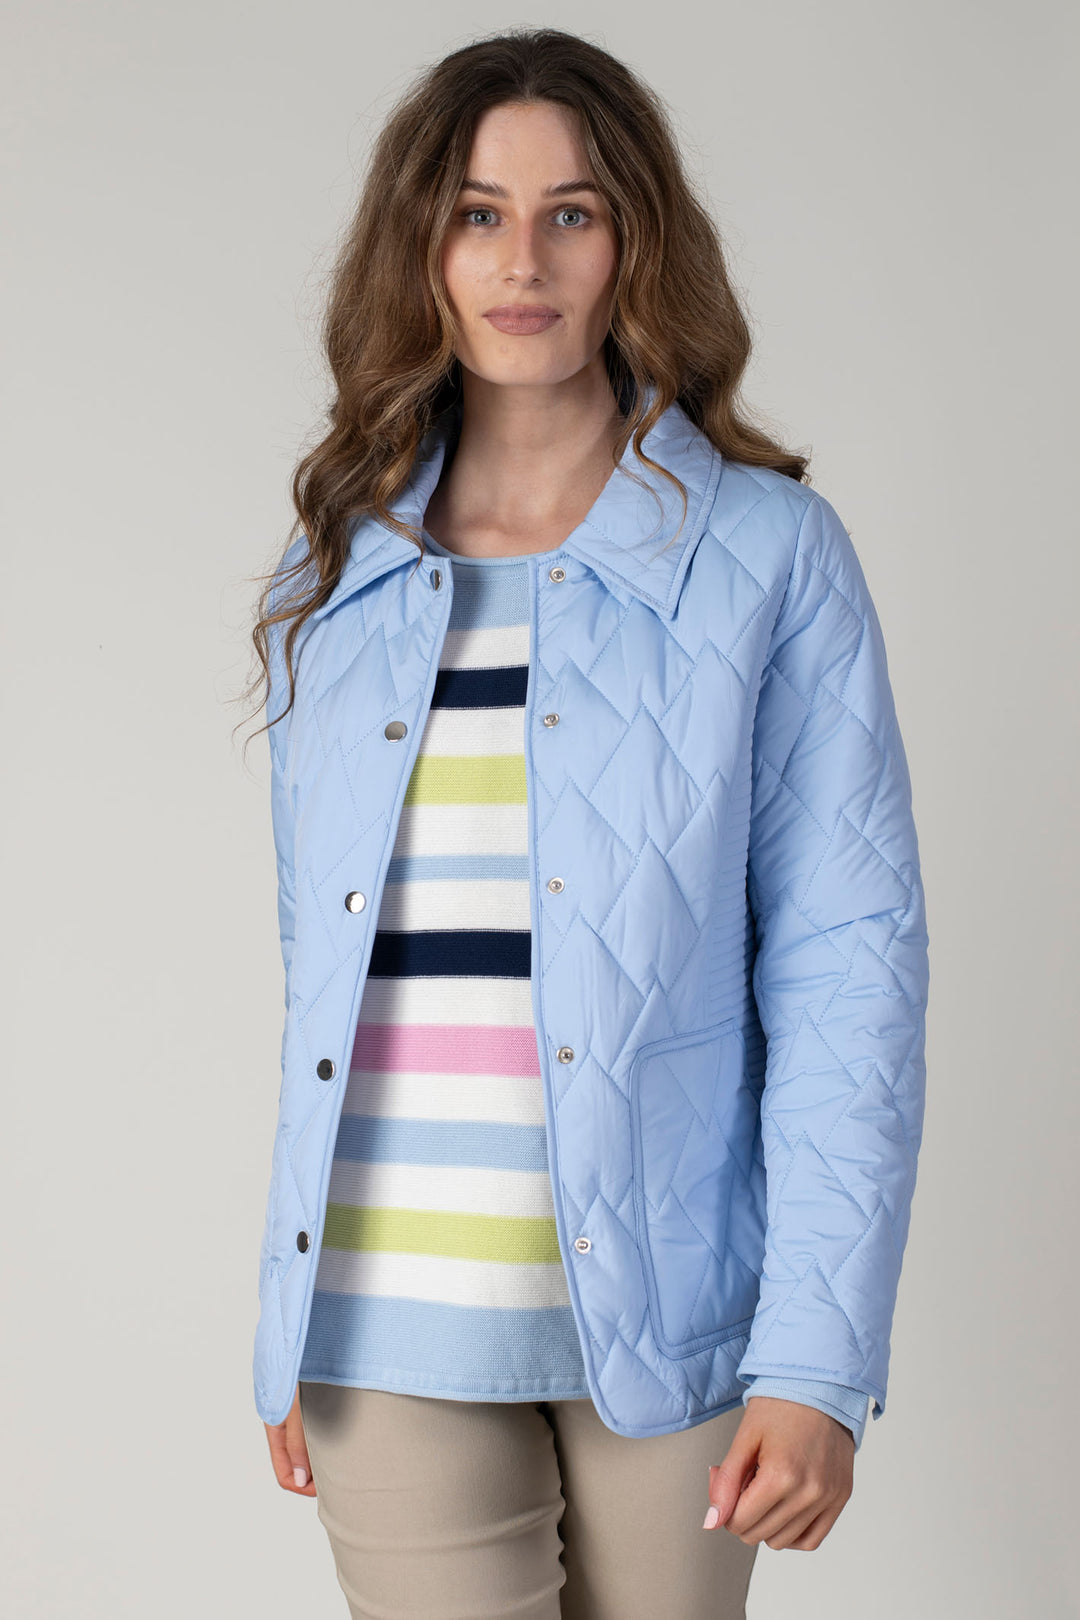 Jessica Graaf 27014 Light Blue Padded Jacket - Experience Boutique